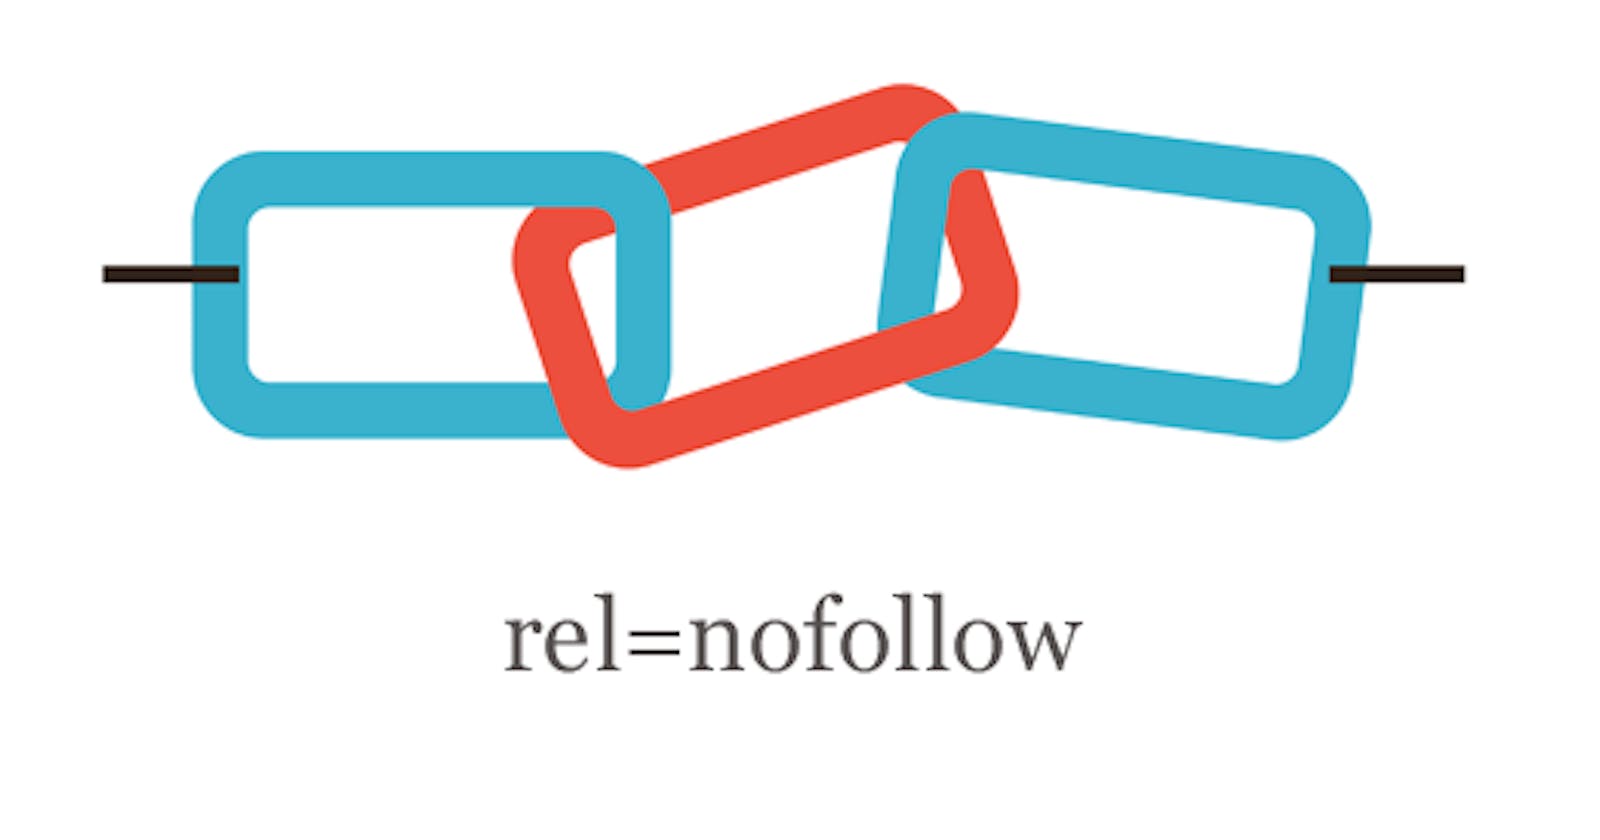 "Nofollow" links are selfish and monopolistic